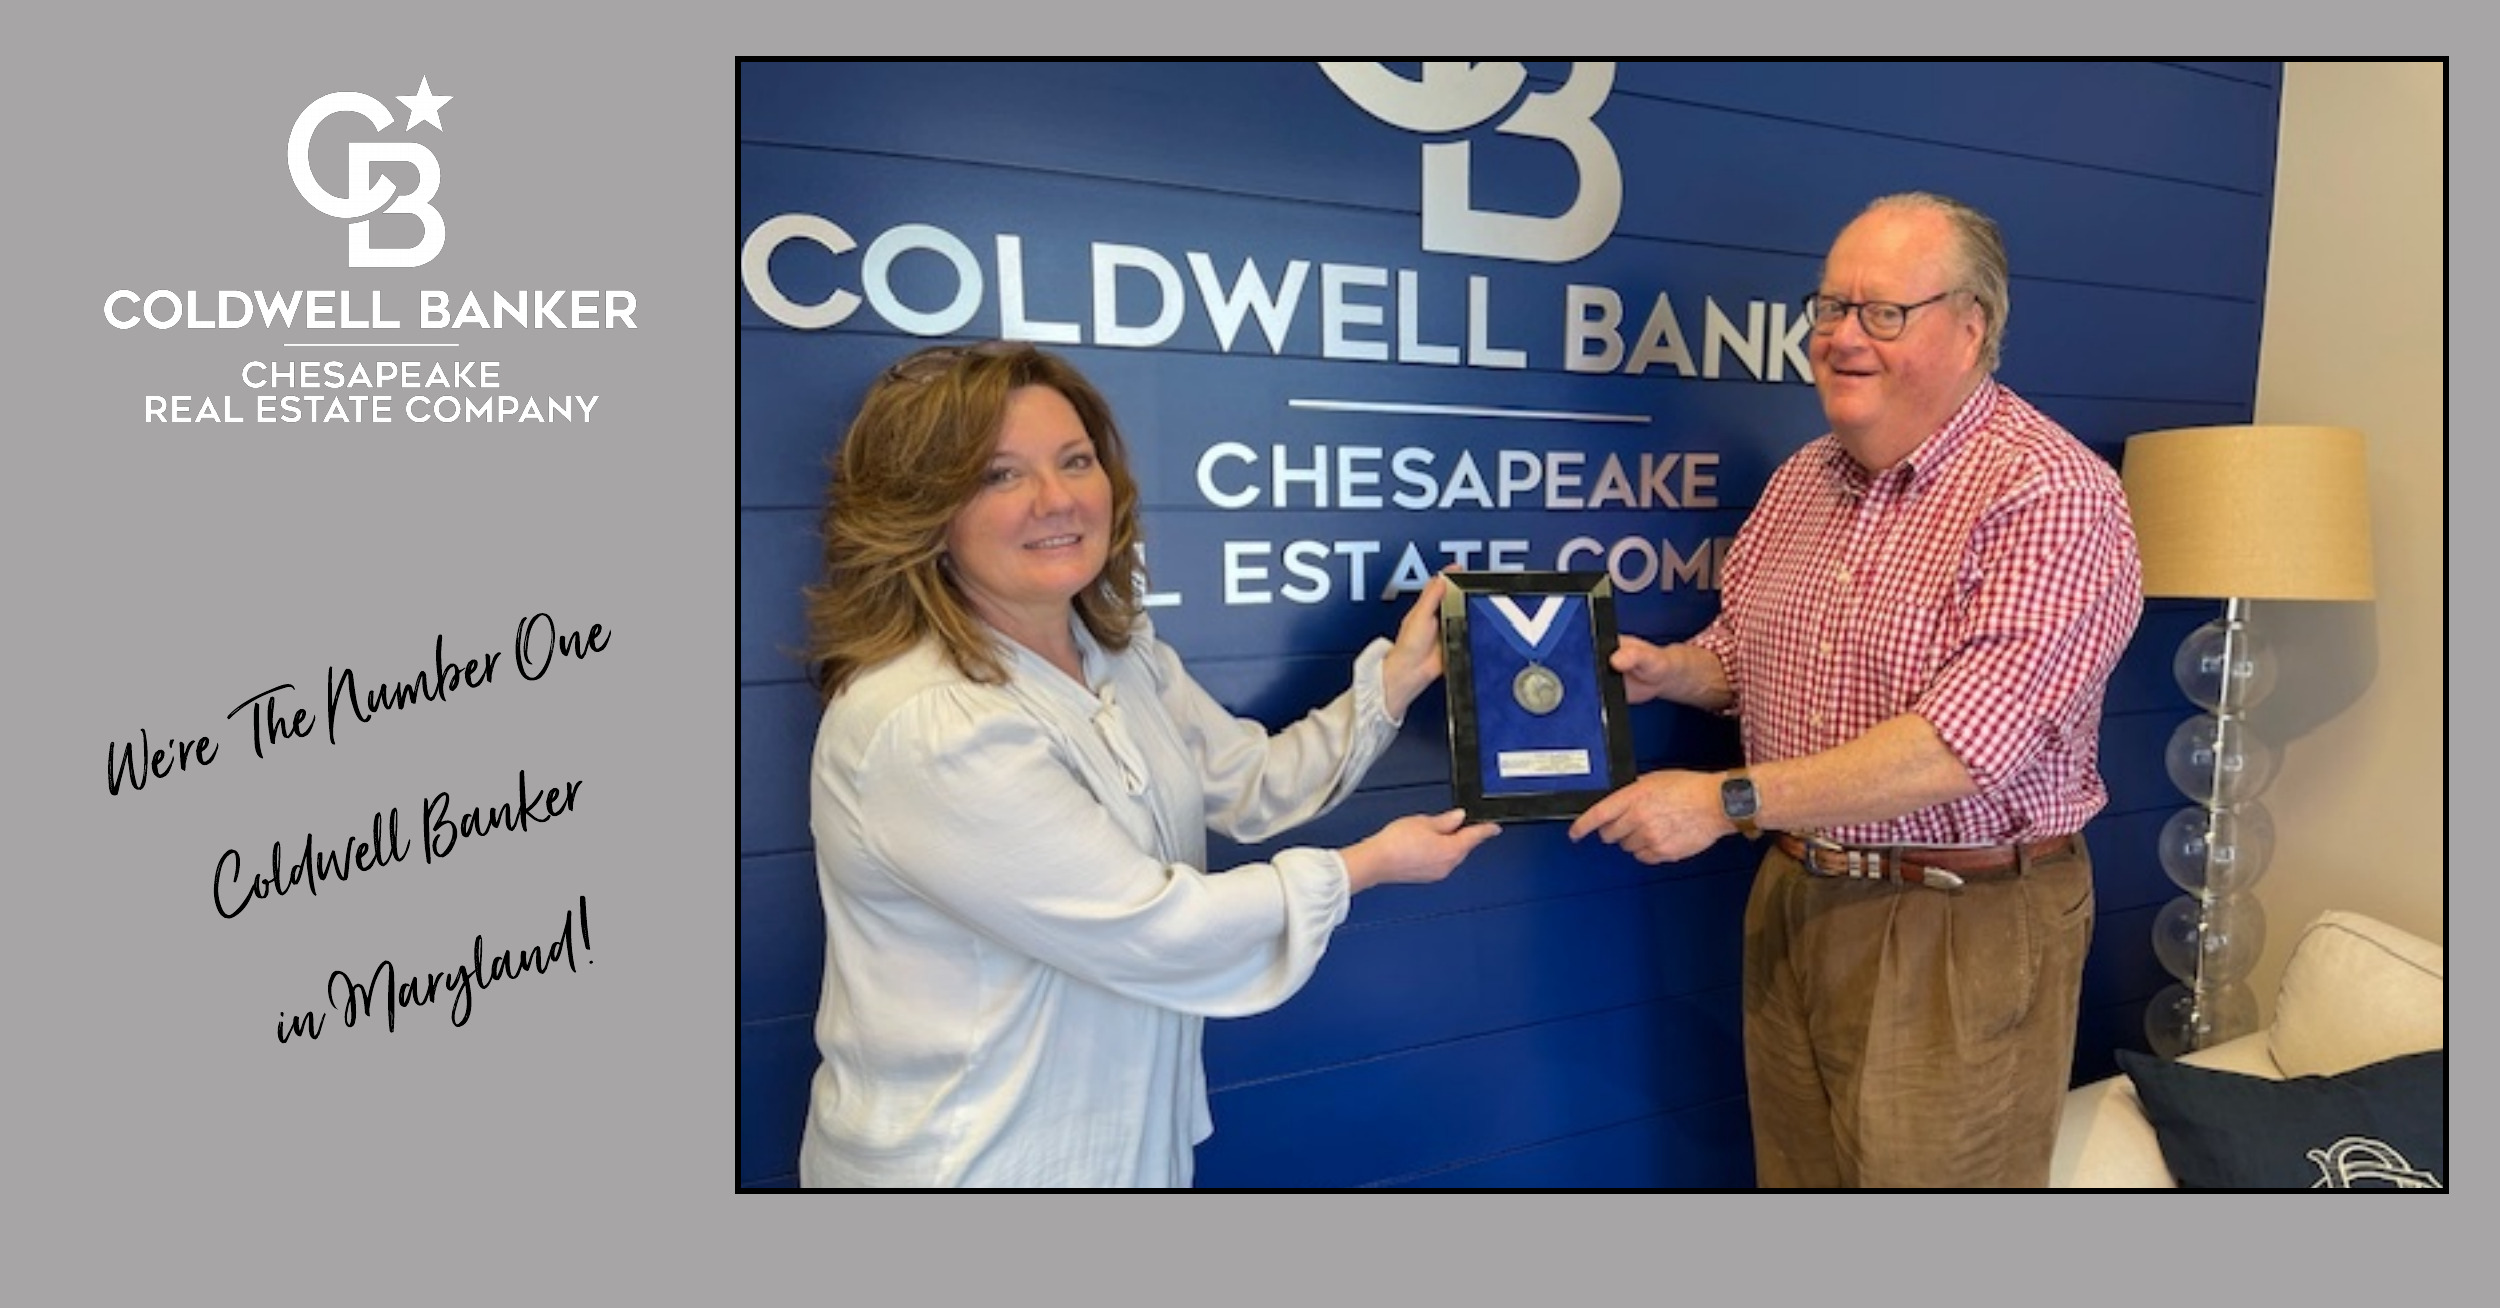 Owners Laurie Renshaw and Hugh Smith, broker of Coldwell Banker Chesapeake